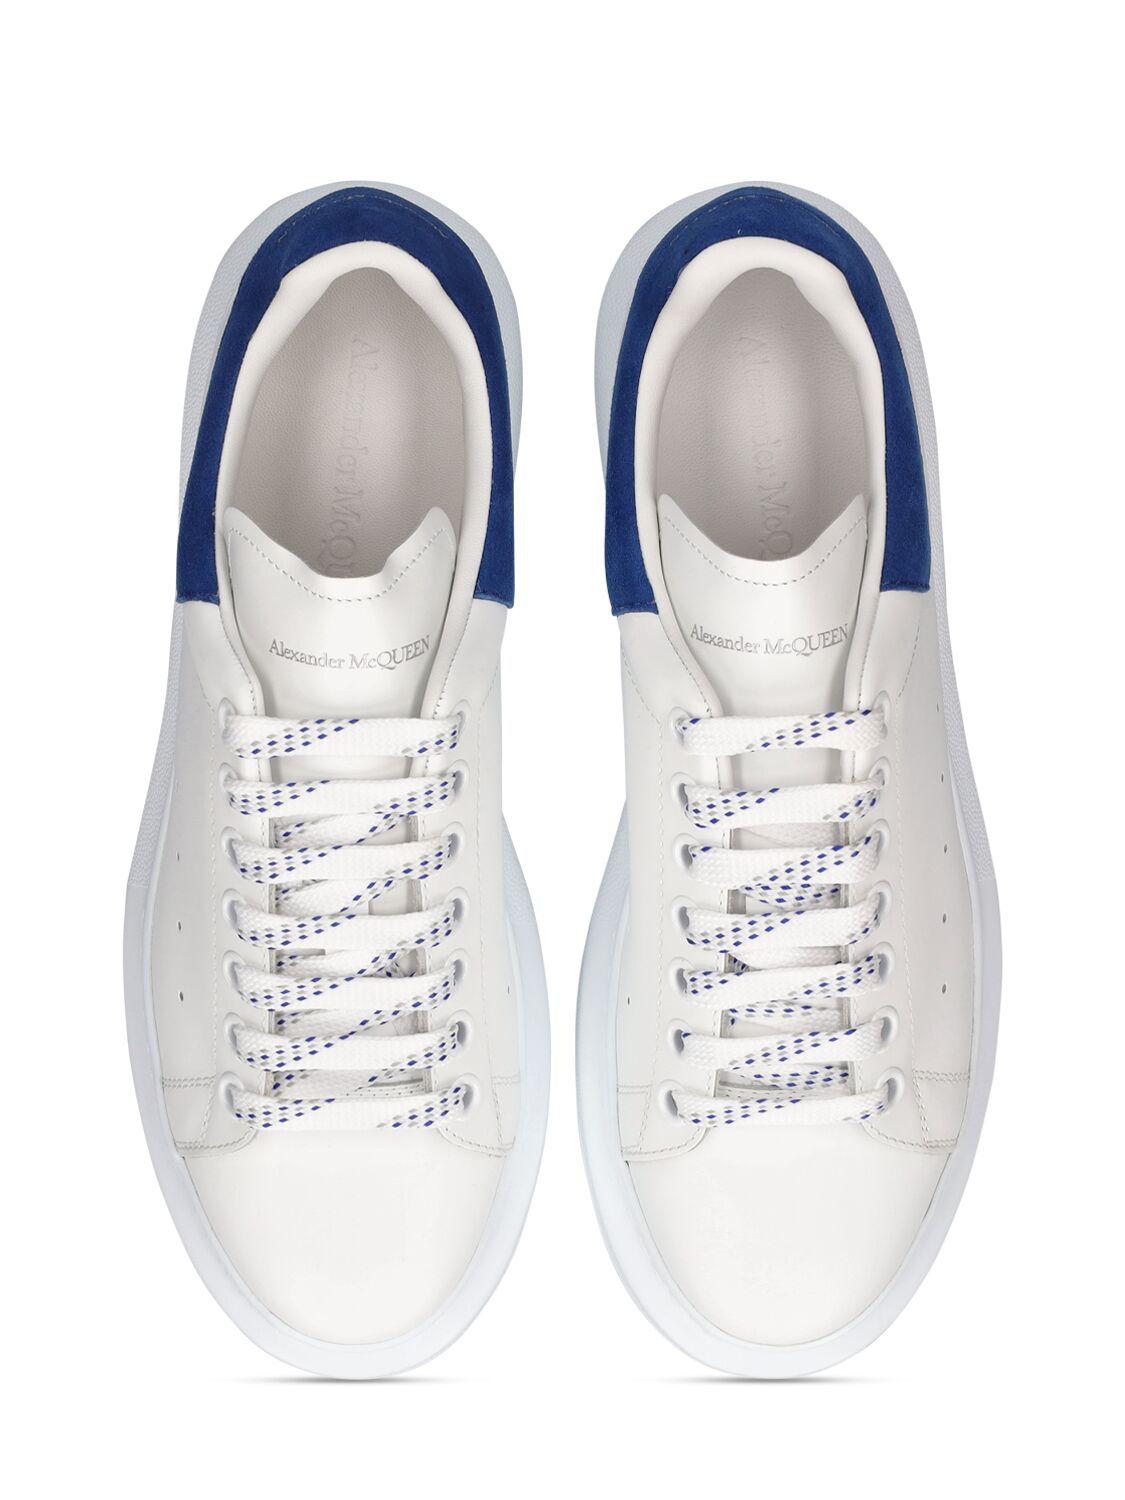 Alexander McQueen 45mm Leather Sneakers in White | Lyst